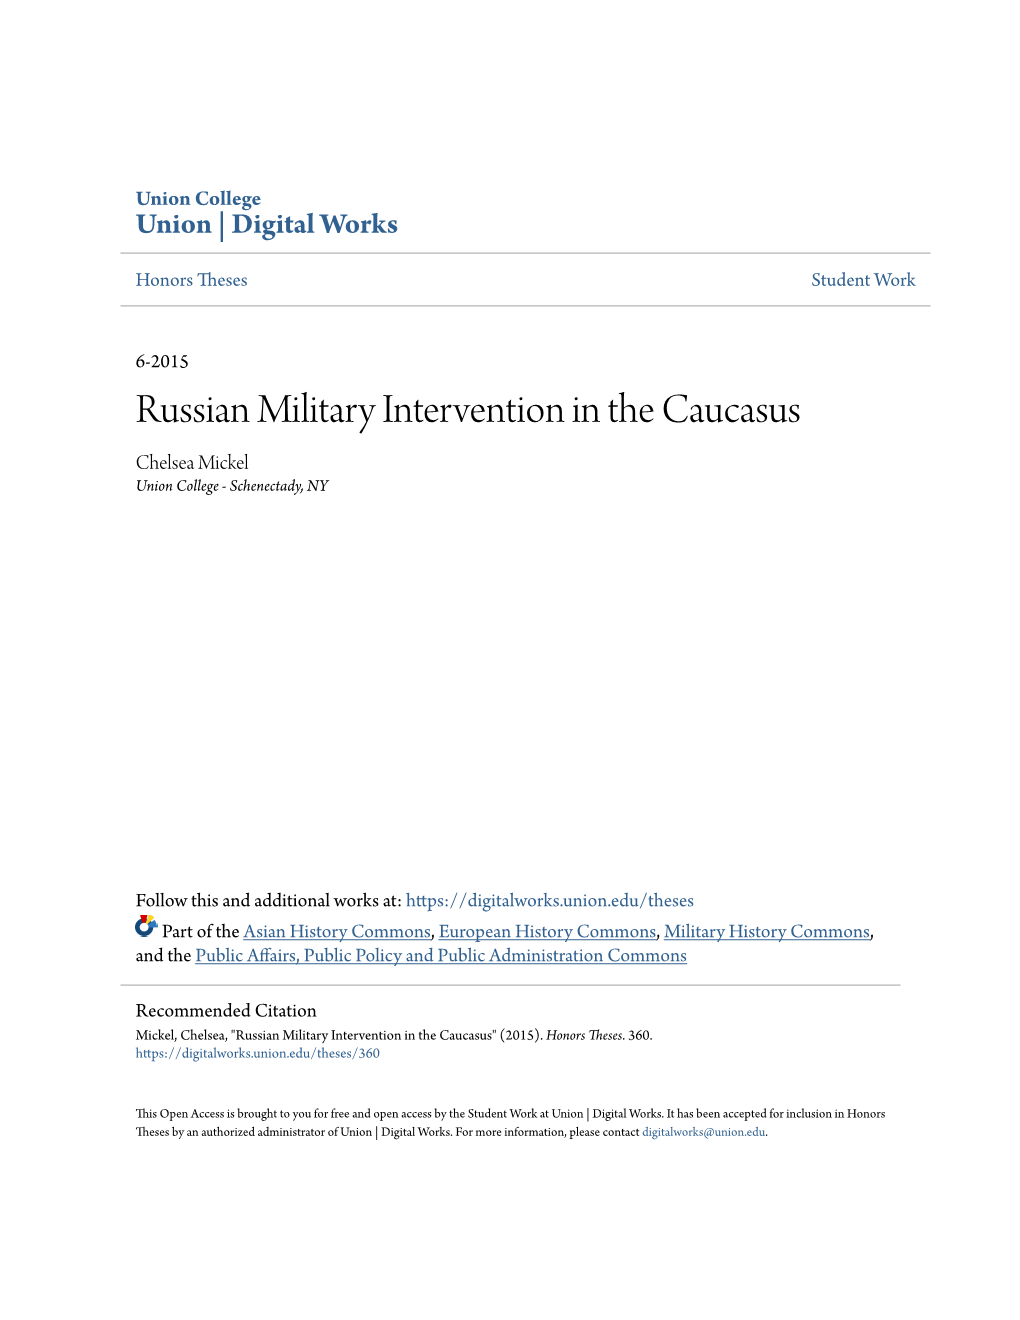 Russian Military Intervention in the Caucasus Chelsea Mickel Union College - Schenectady, NY